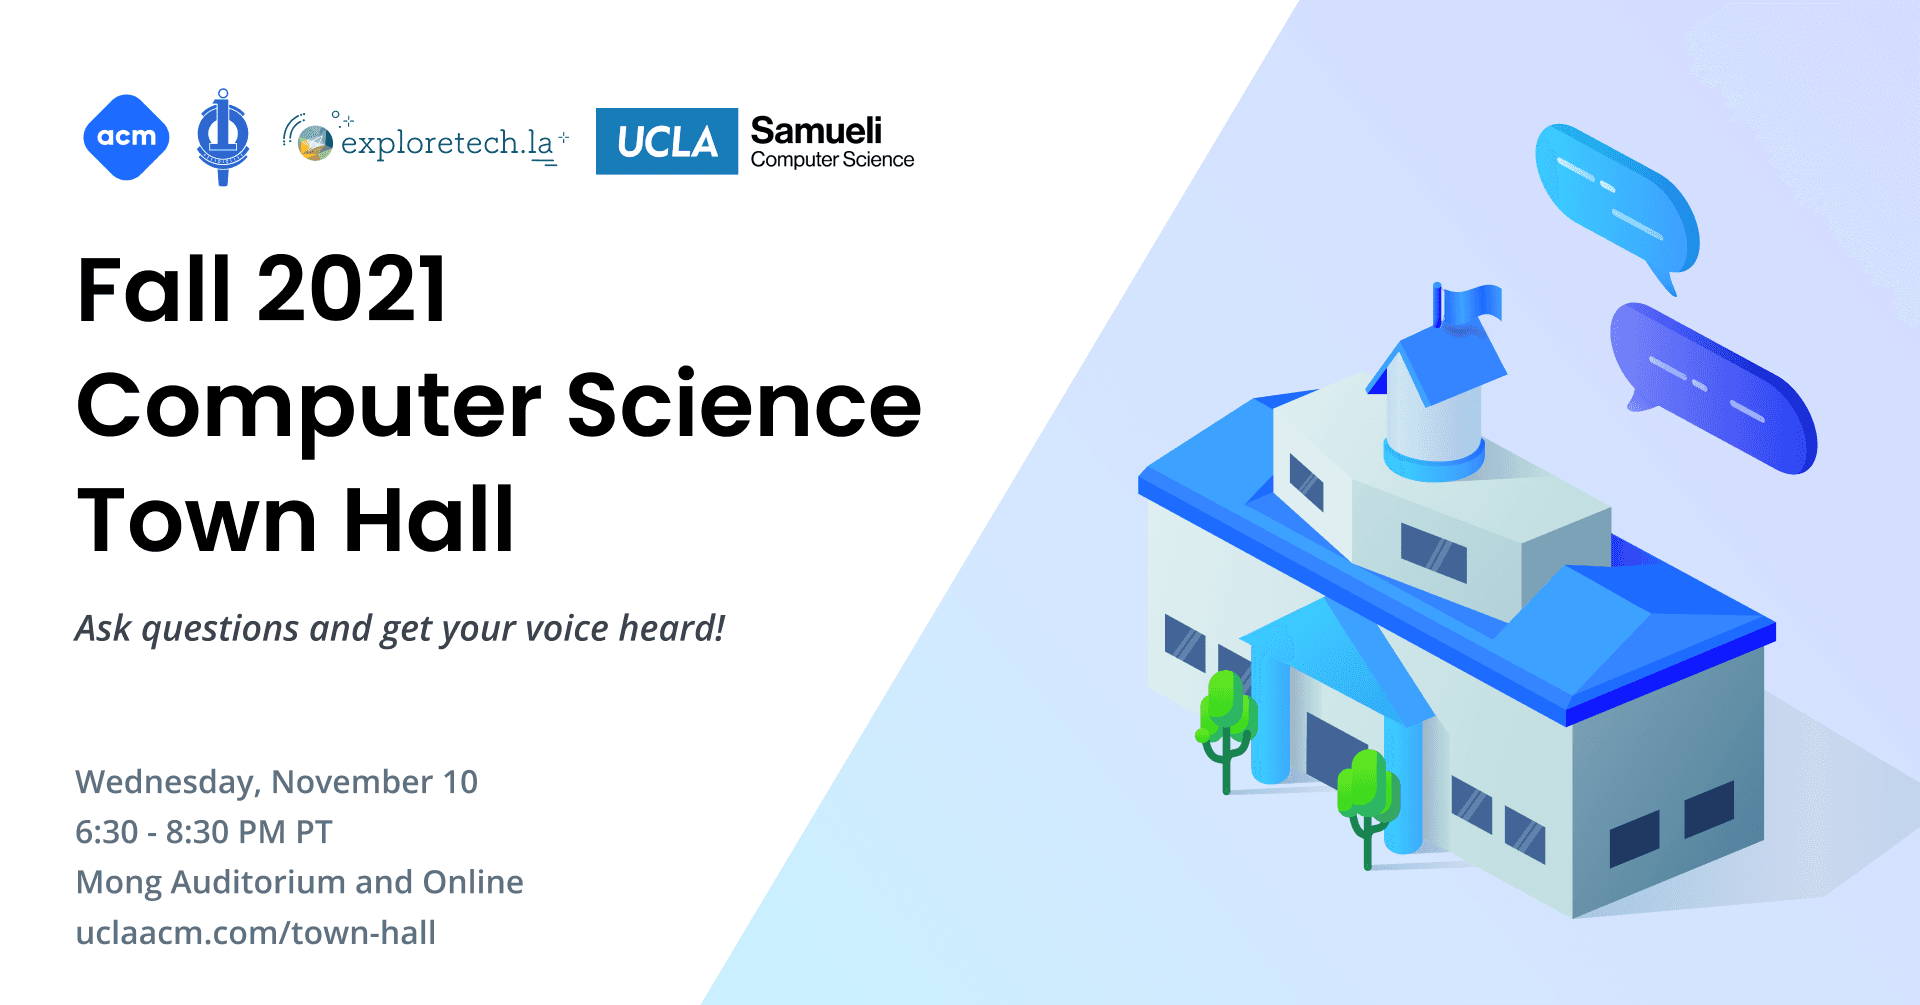 A banner that reads 'Fall 2021 Computer Science Town Hall: ask questions and get your voice heard! Wednesday, November 10 from 6:30 - 8:30 PM PT. Held at the Mong Auditorium and Online; visit uclaacm.com/town-hall for more information. Co-hosted by ACM at UCLA, UPE at UCLA, exploretech.la, and the UCLA Computer Science Department.'